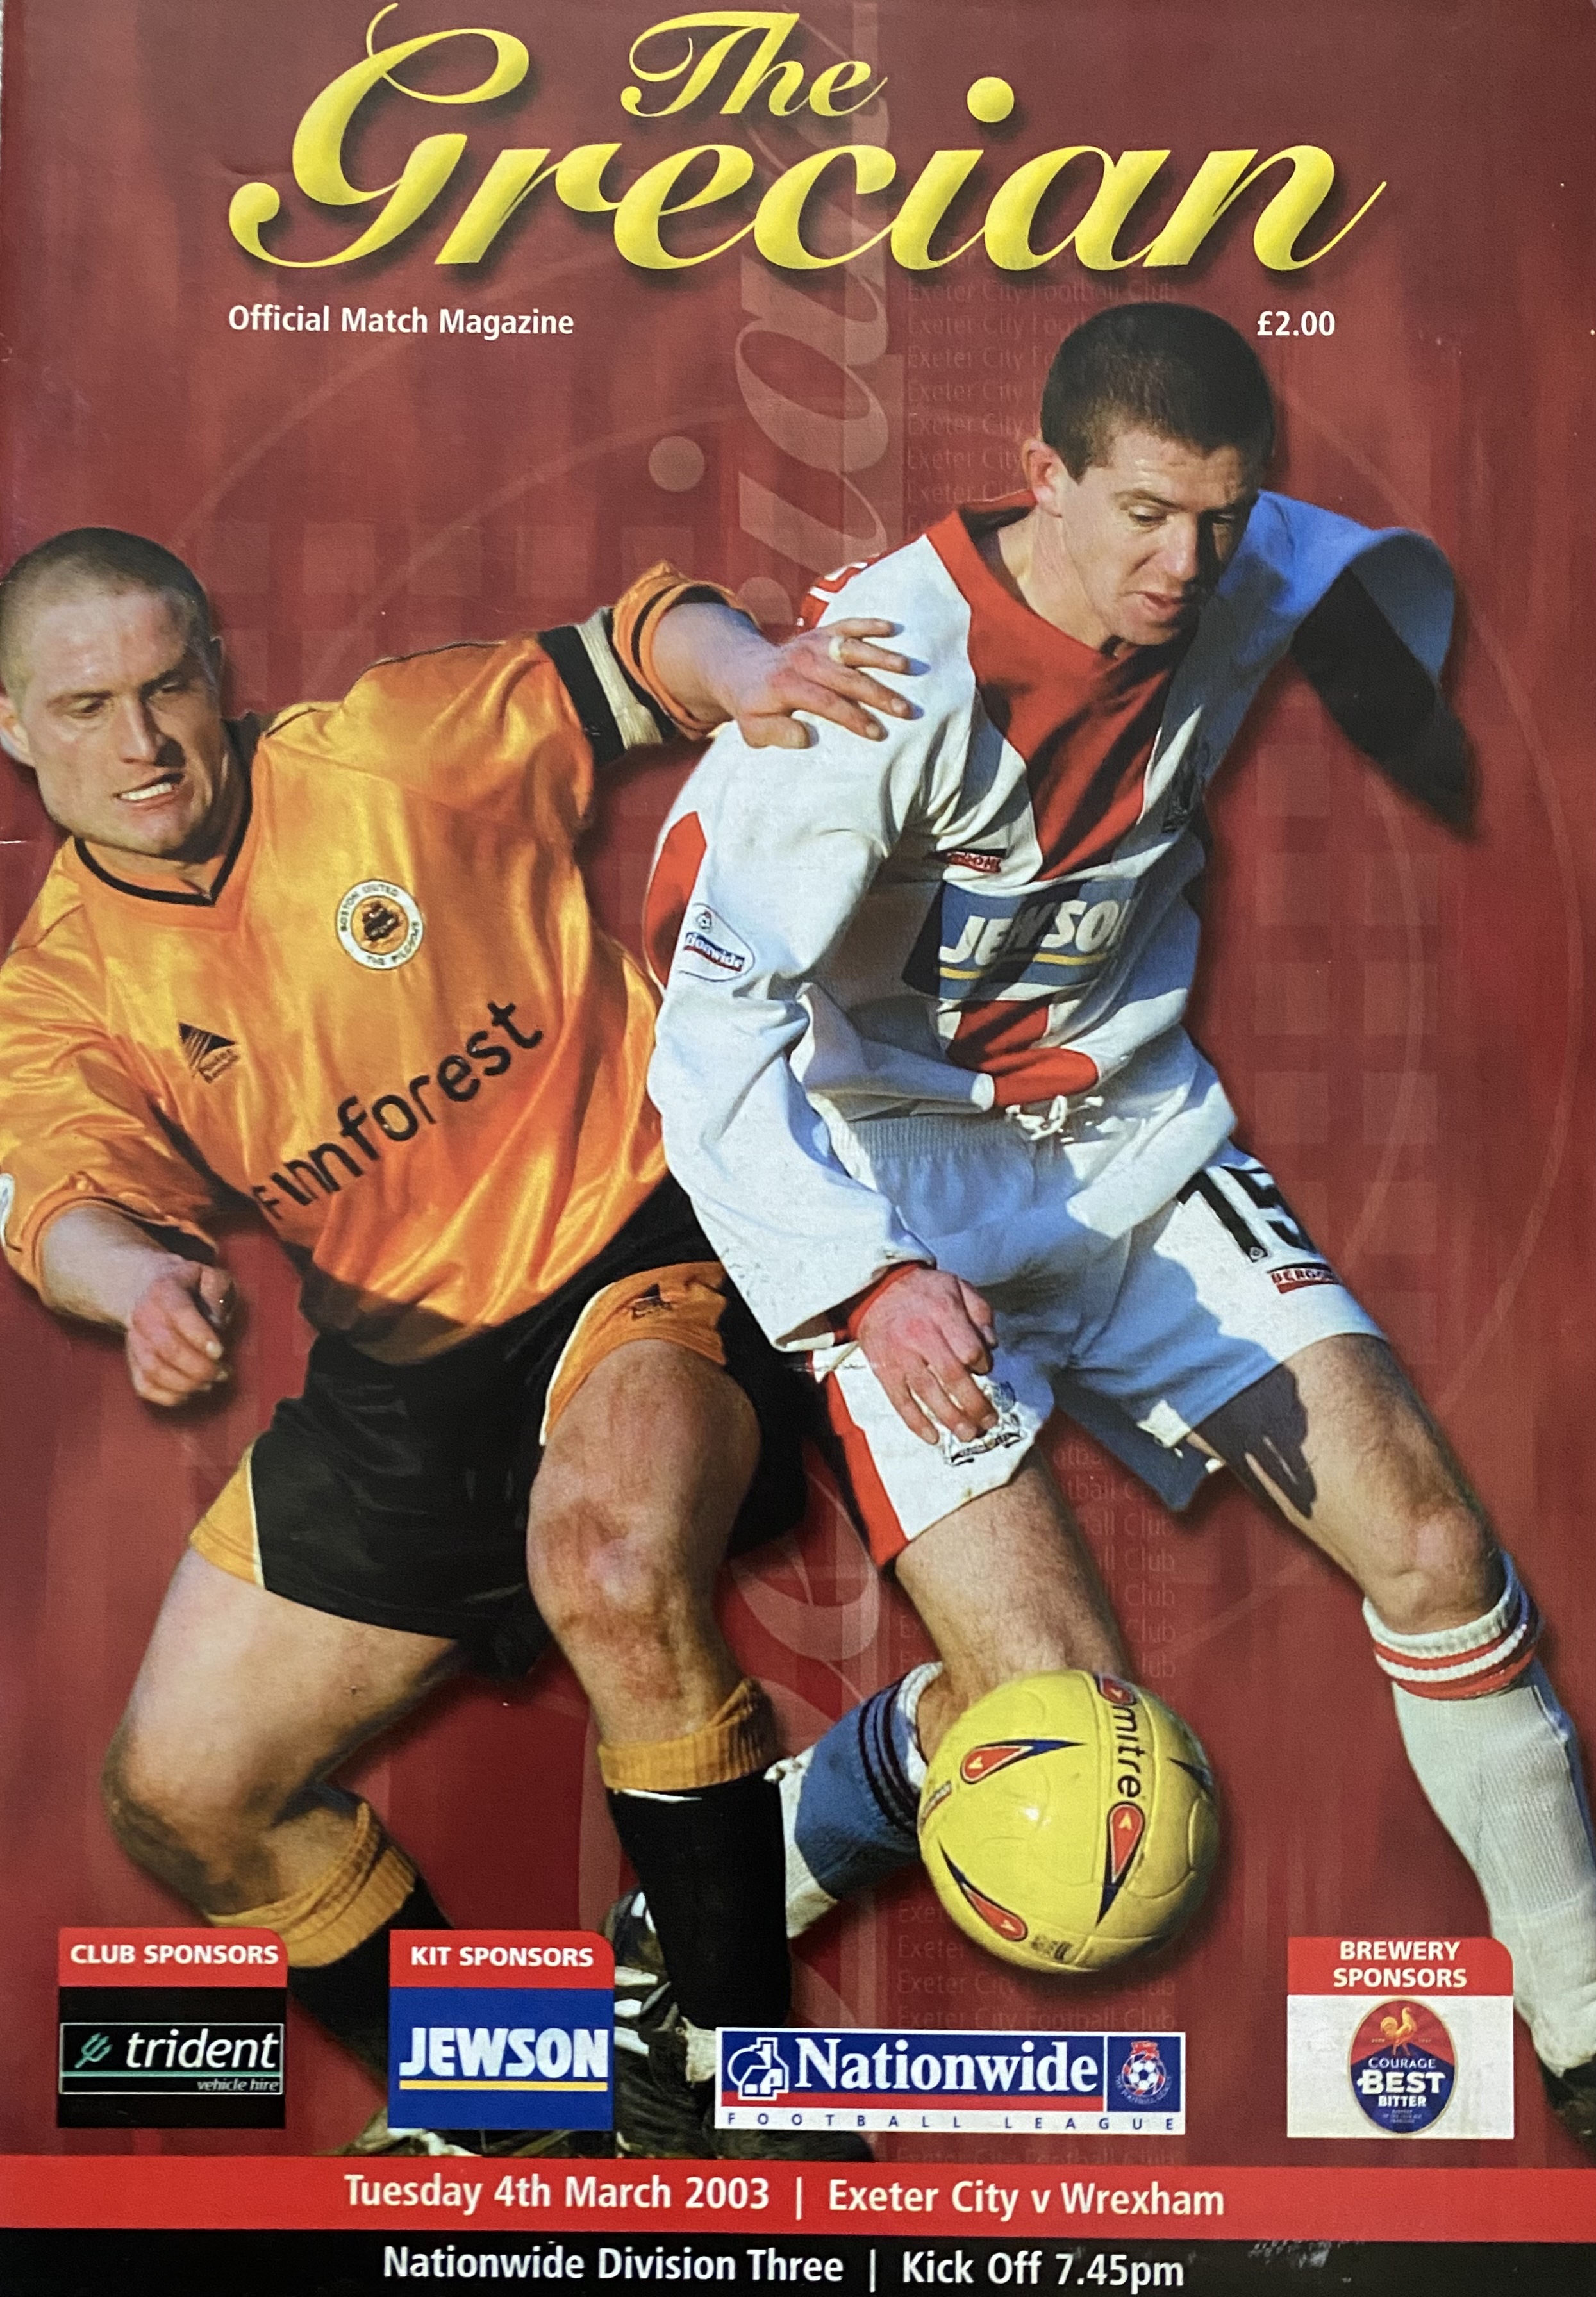 The programme from Exeter versus Wrexham in 2003